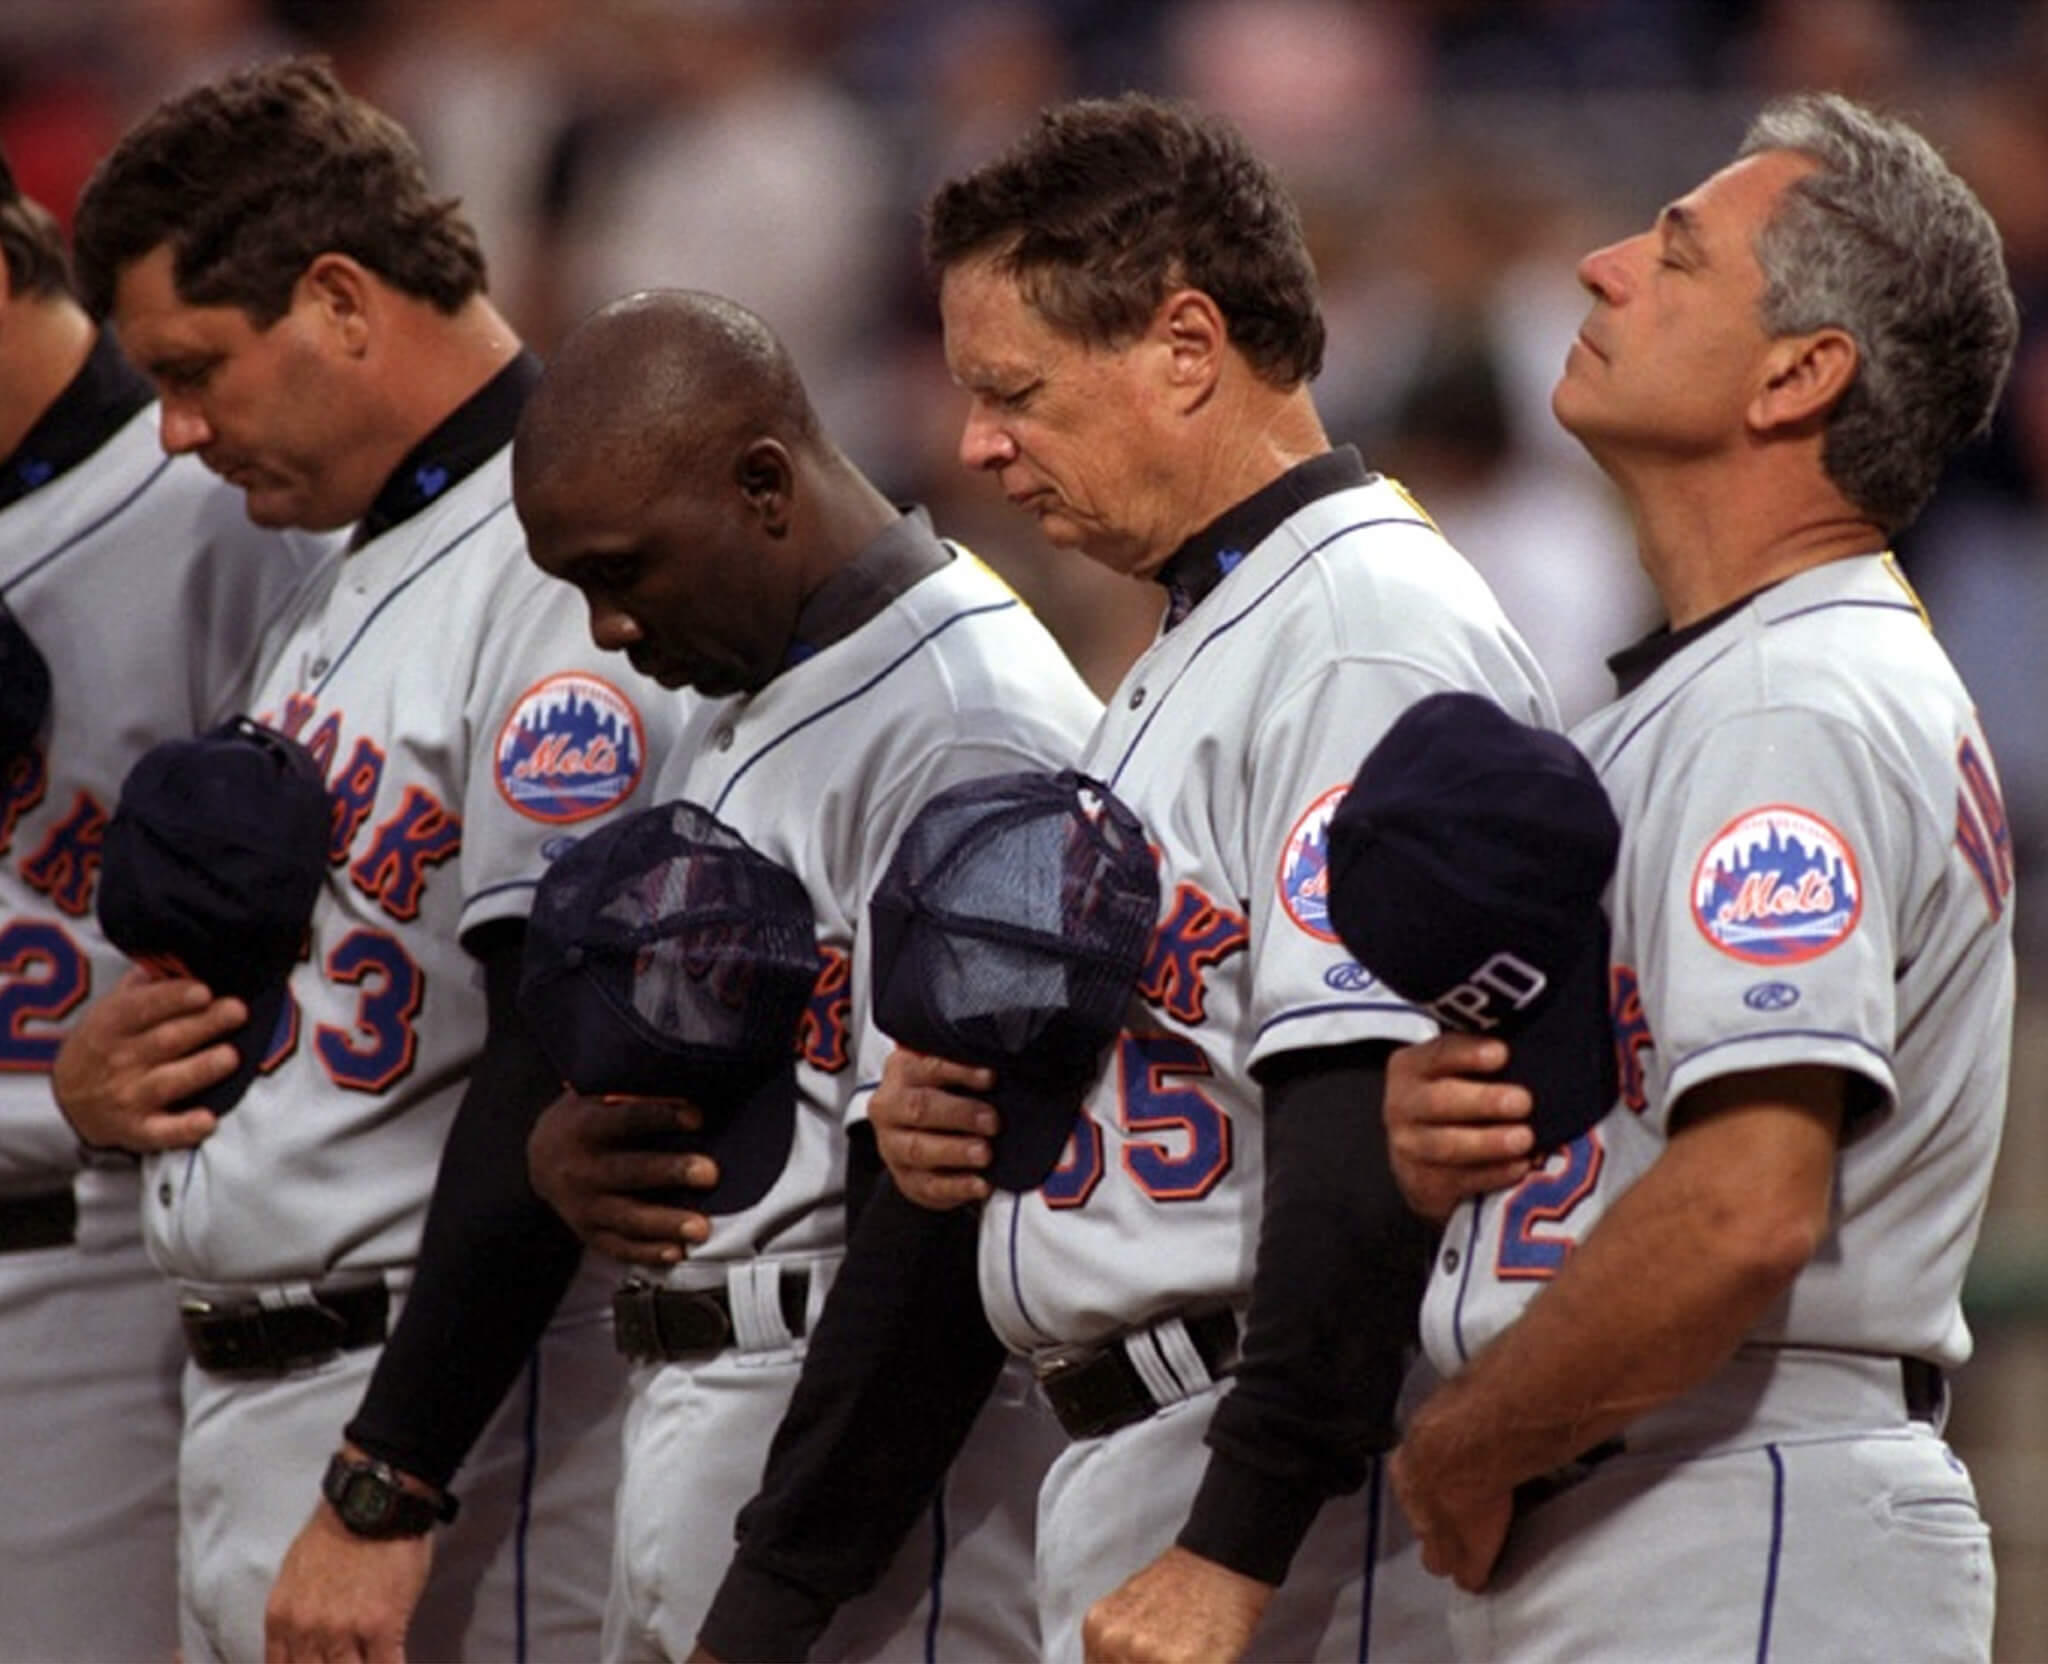 Heartbreak and hope: Members of 2001 Mets reflect on their role in